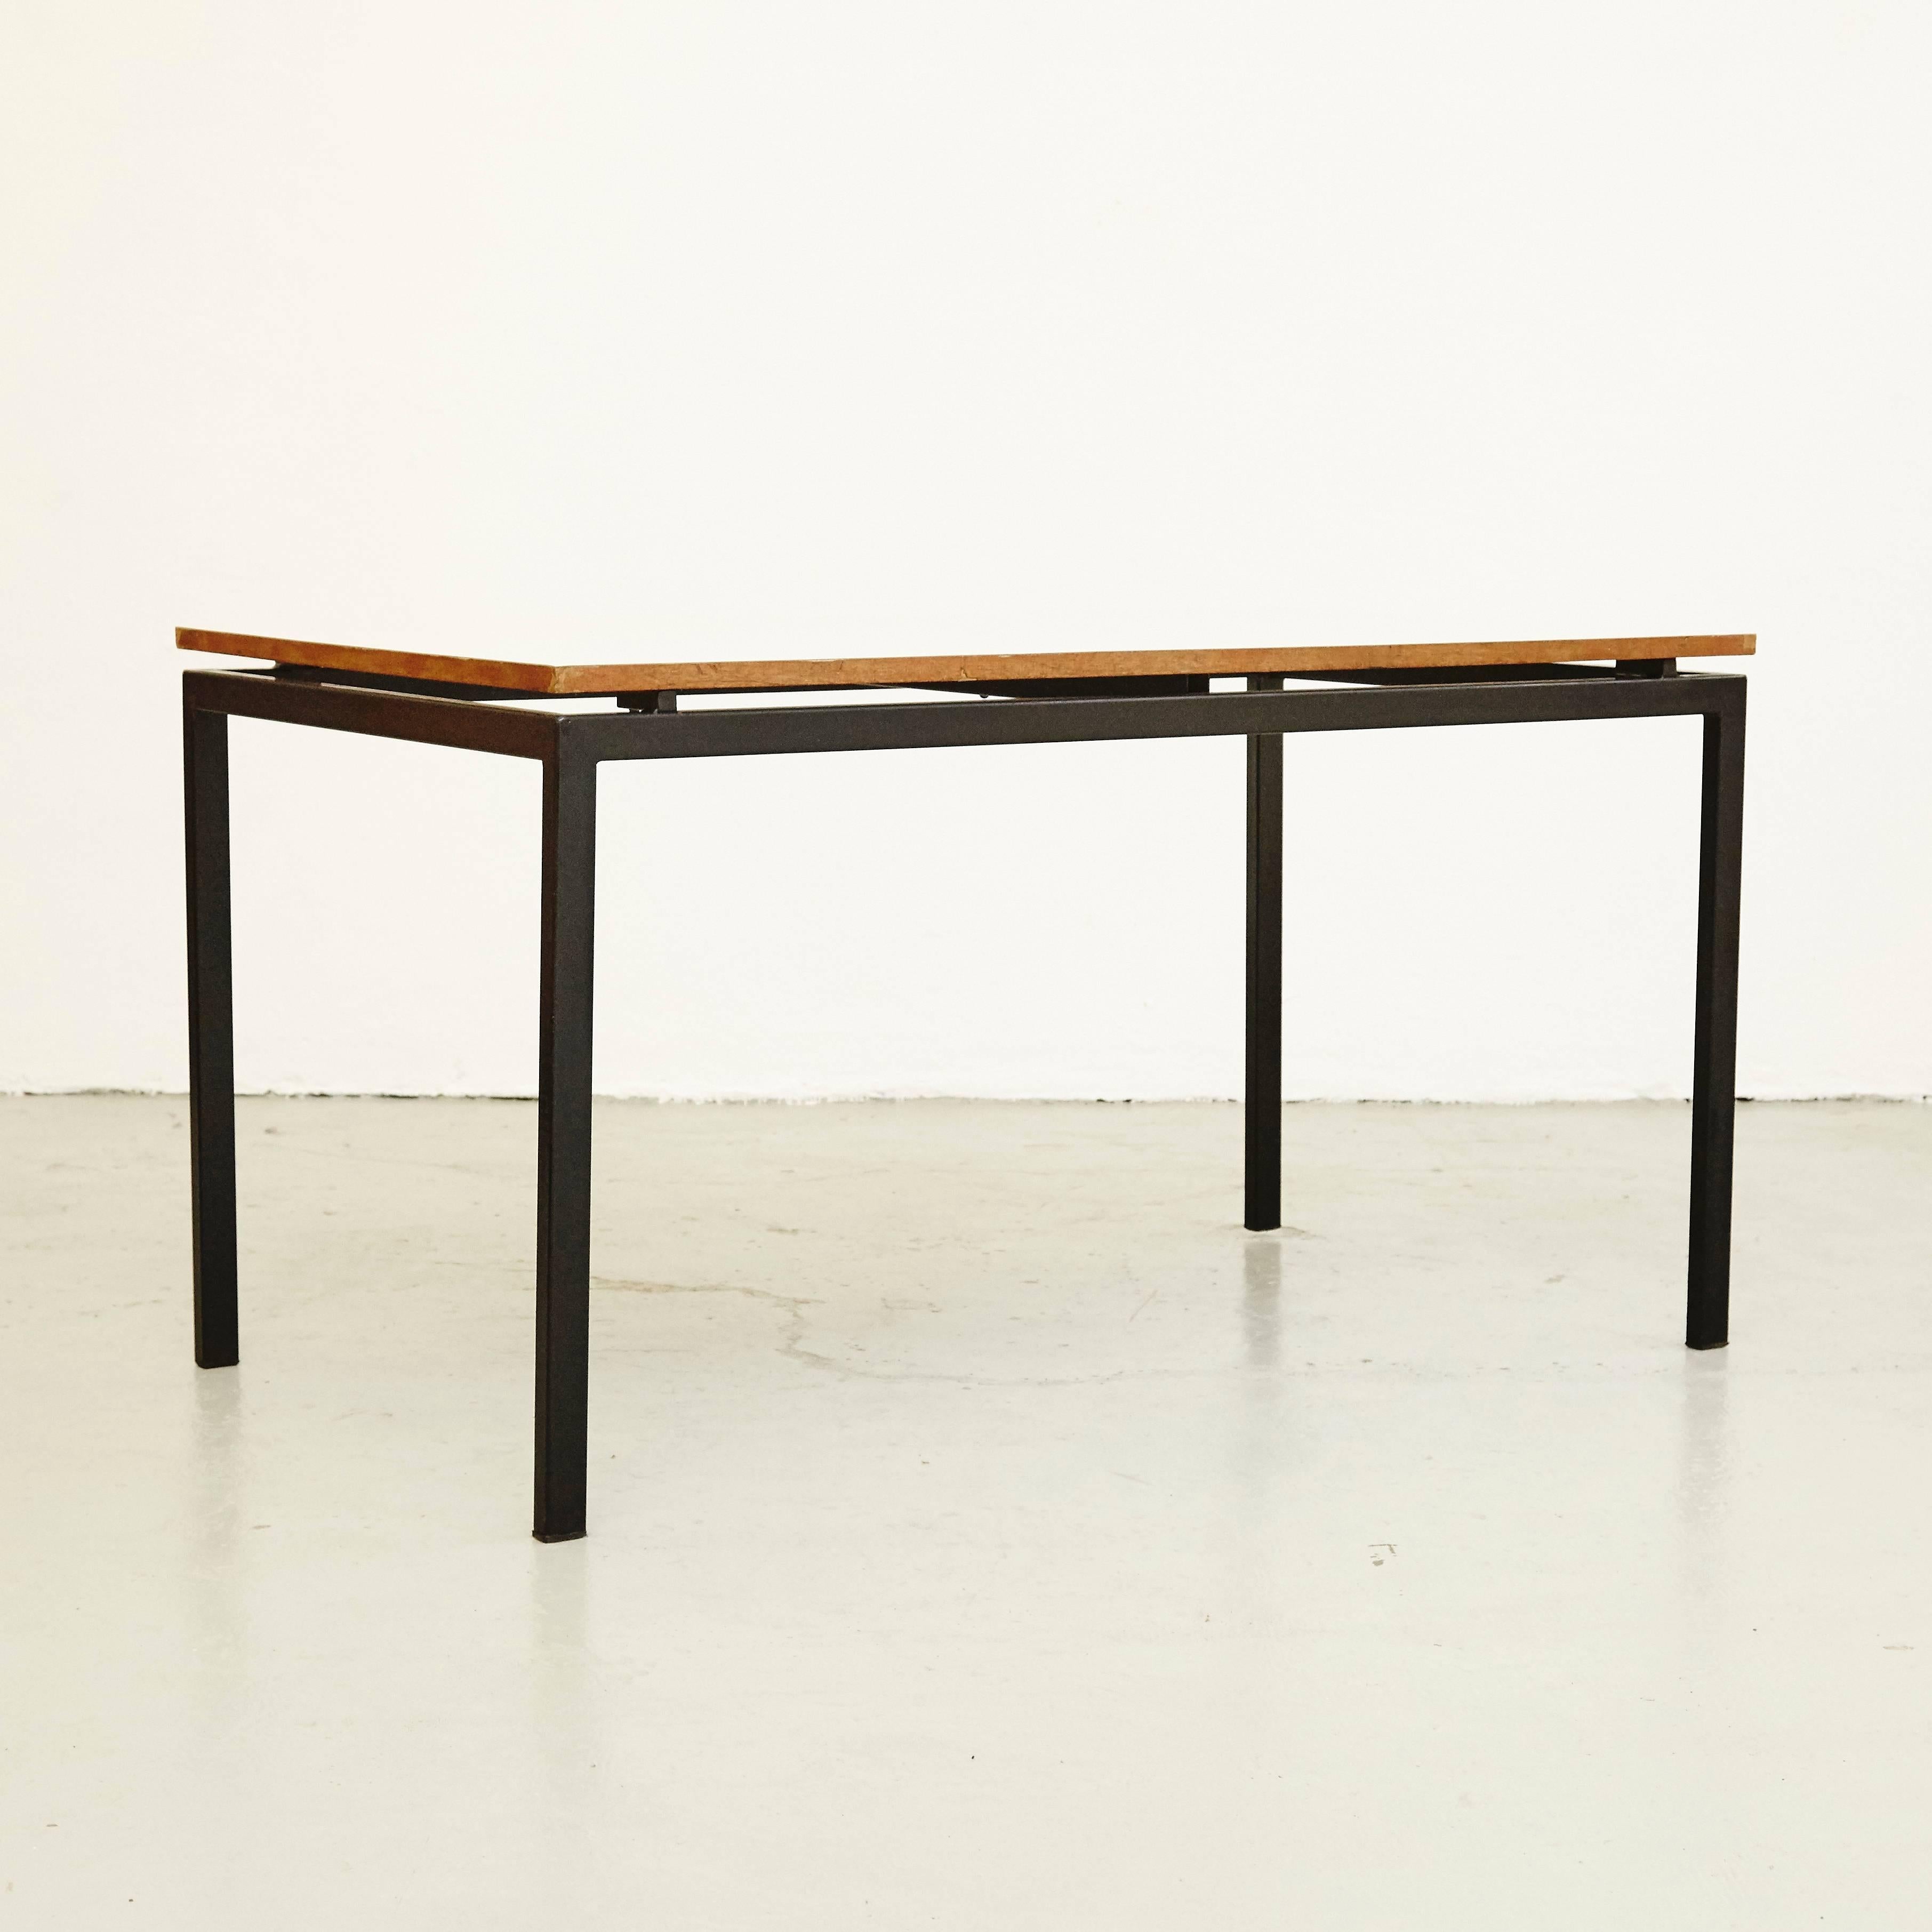 French Charlotte Perriand Mid-Century Modern Metal and Formica Cansado Table circa 1950